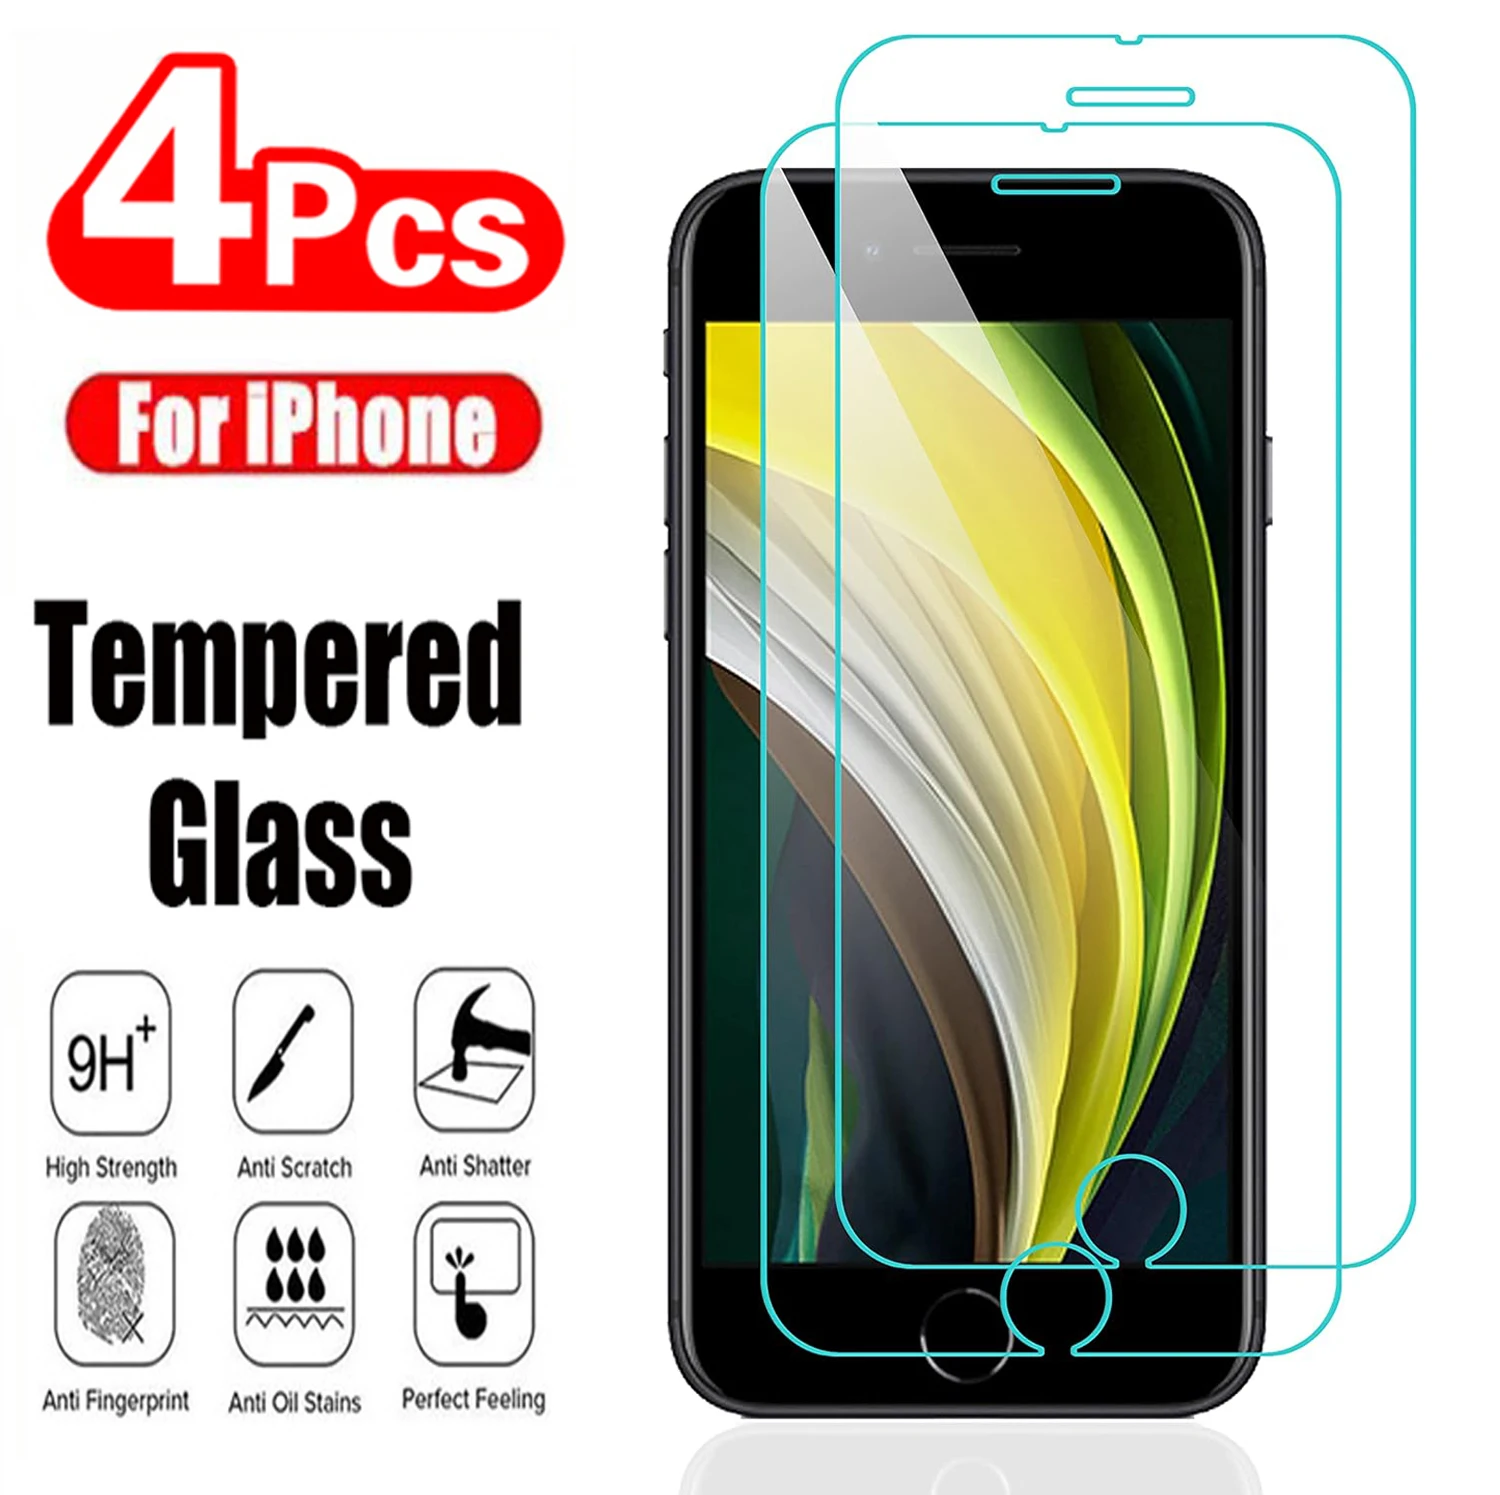 

4Pcs HD Not Full Cover Tempered Glass For iPhone 7 8 Plus 6 6s Plus 5 5S Screen Protector For iPhone SE2020 SE2022 Glass